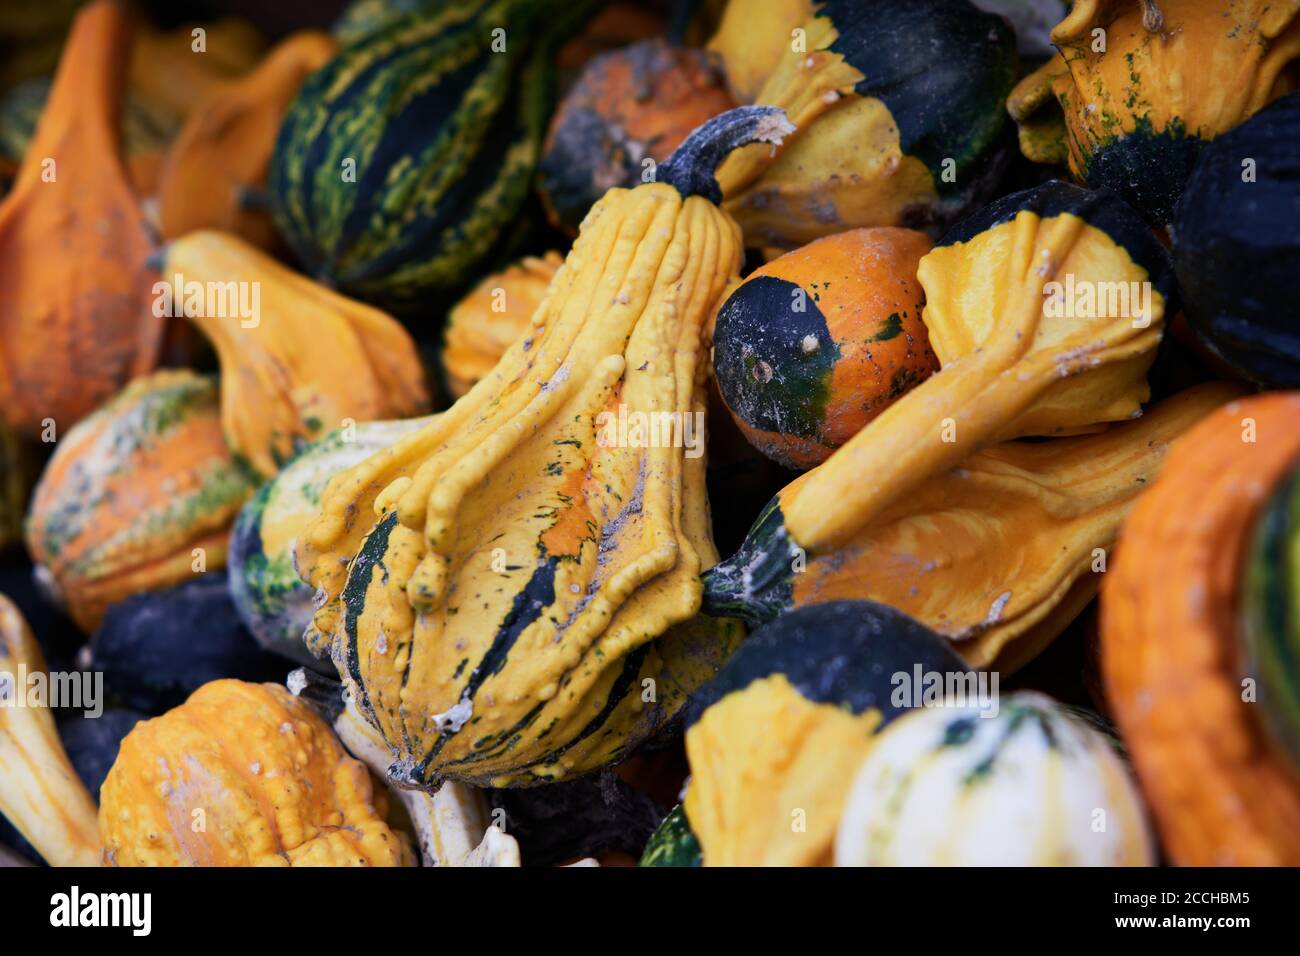 A closeup shot of a wooden display stand with an abundance of small colorful squashes also called bitter apple or colocynth (Citrullus colocynthis) Stock Photo